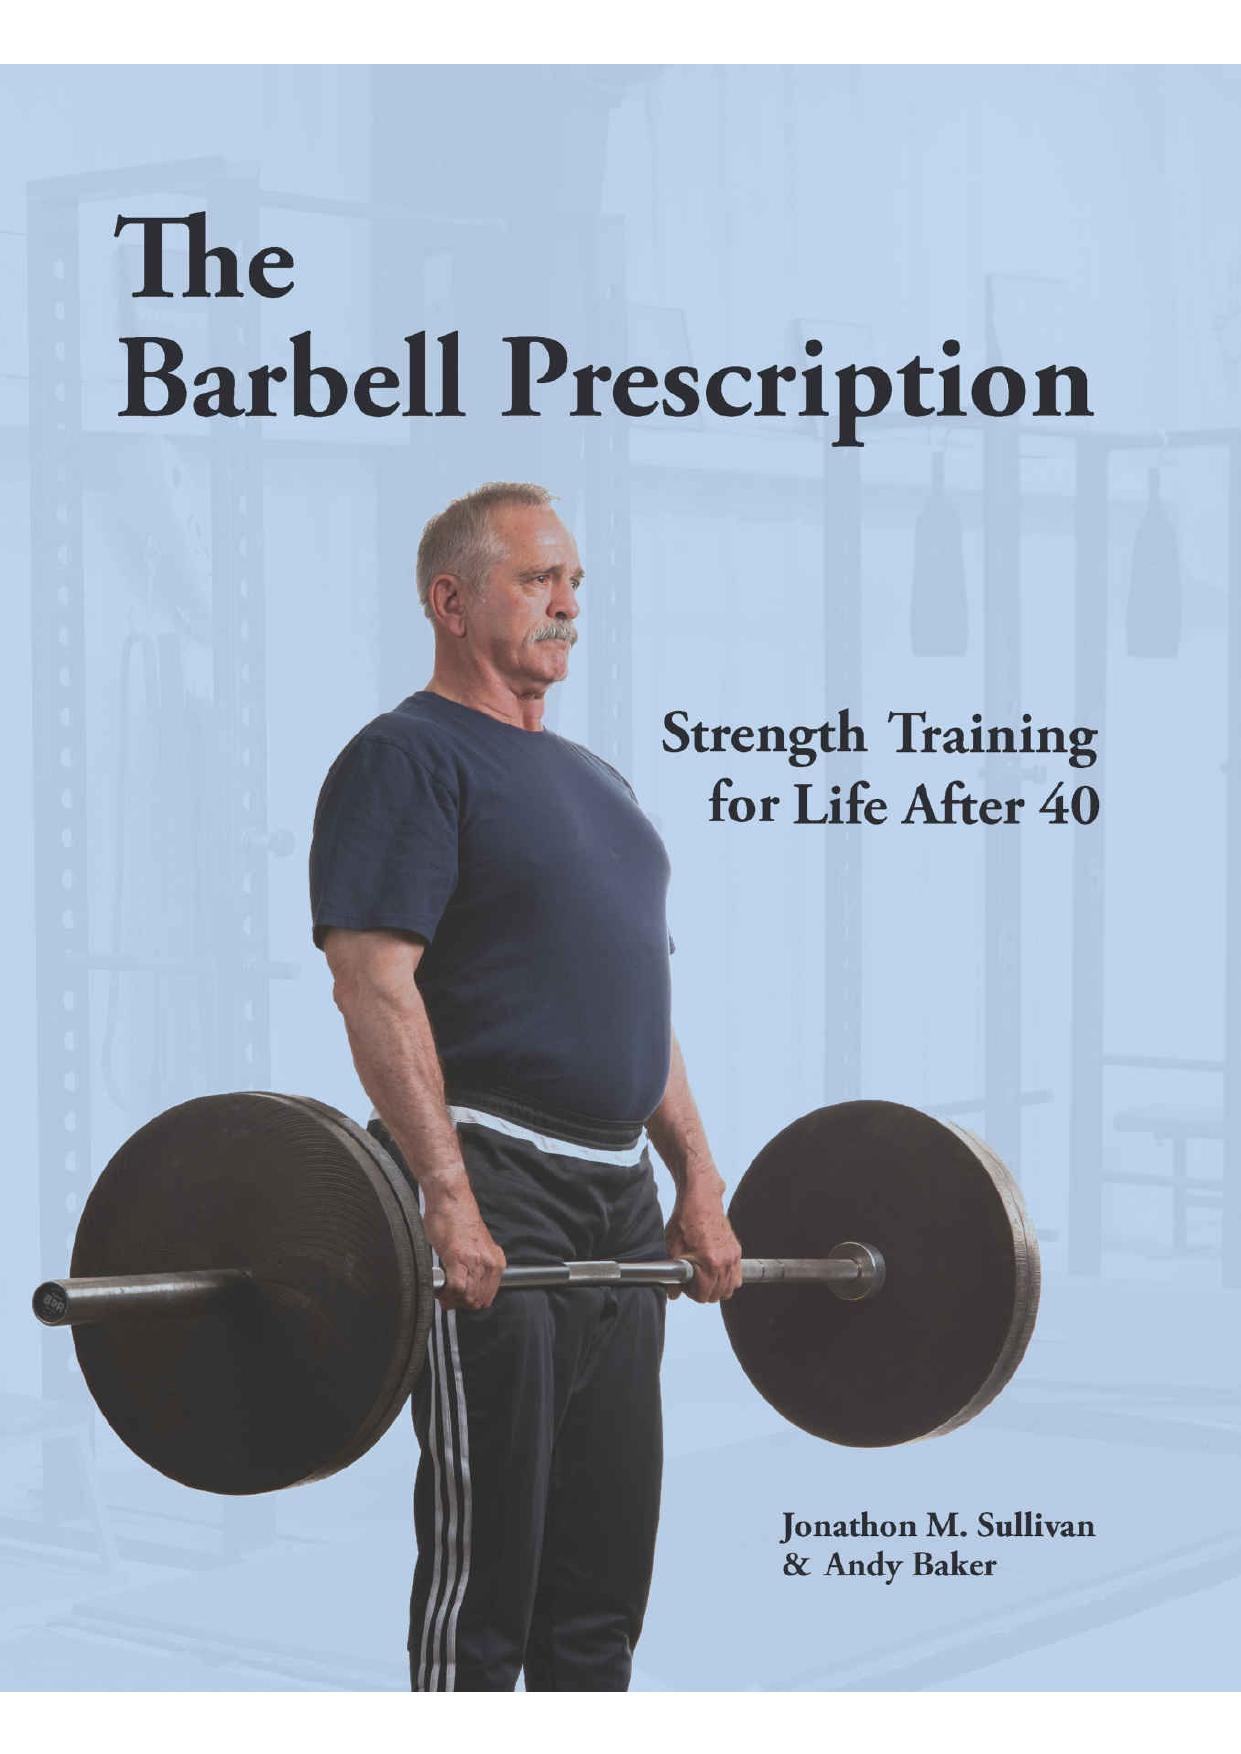 Barbell Prescription_ Strength Training for Life After 40, The - Jonathon M Sullivan  and  Andy Baker by Jonathon M Sullivan, Andy Baker